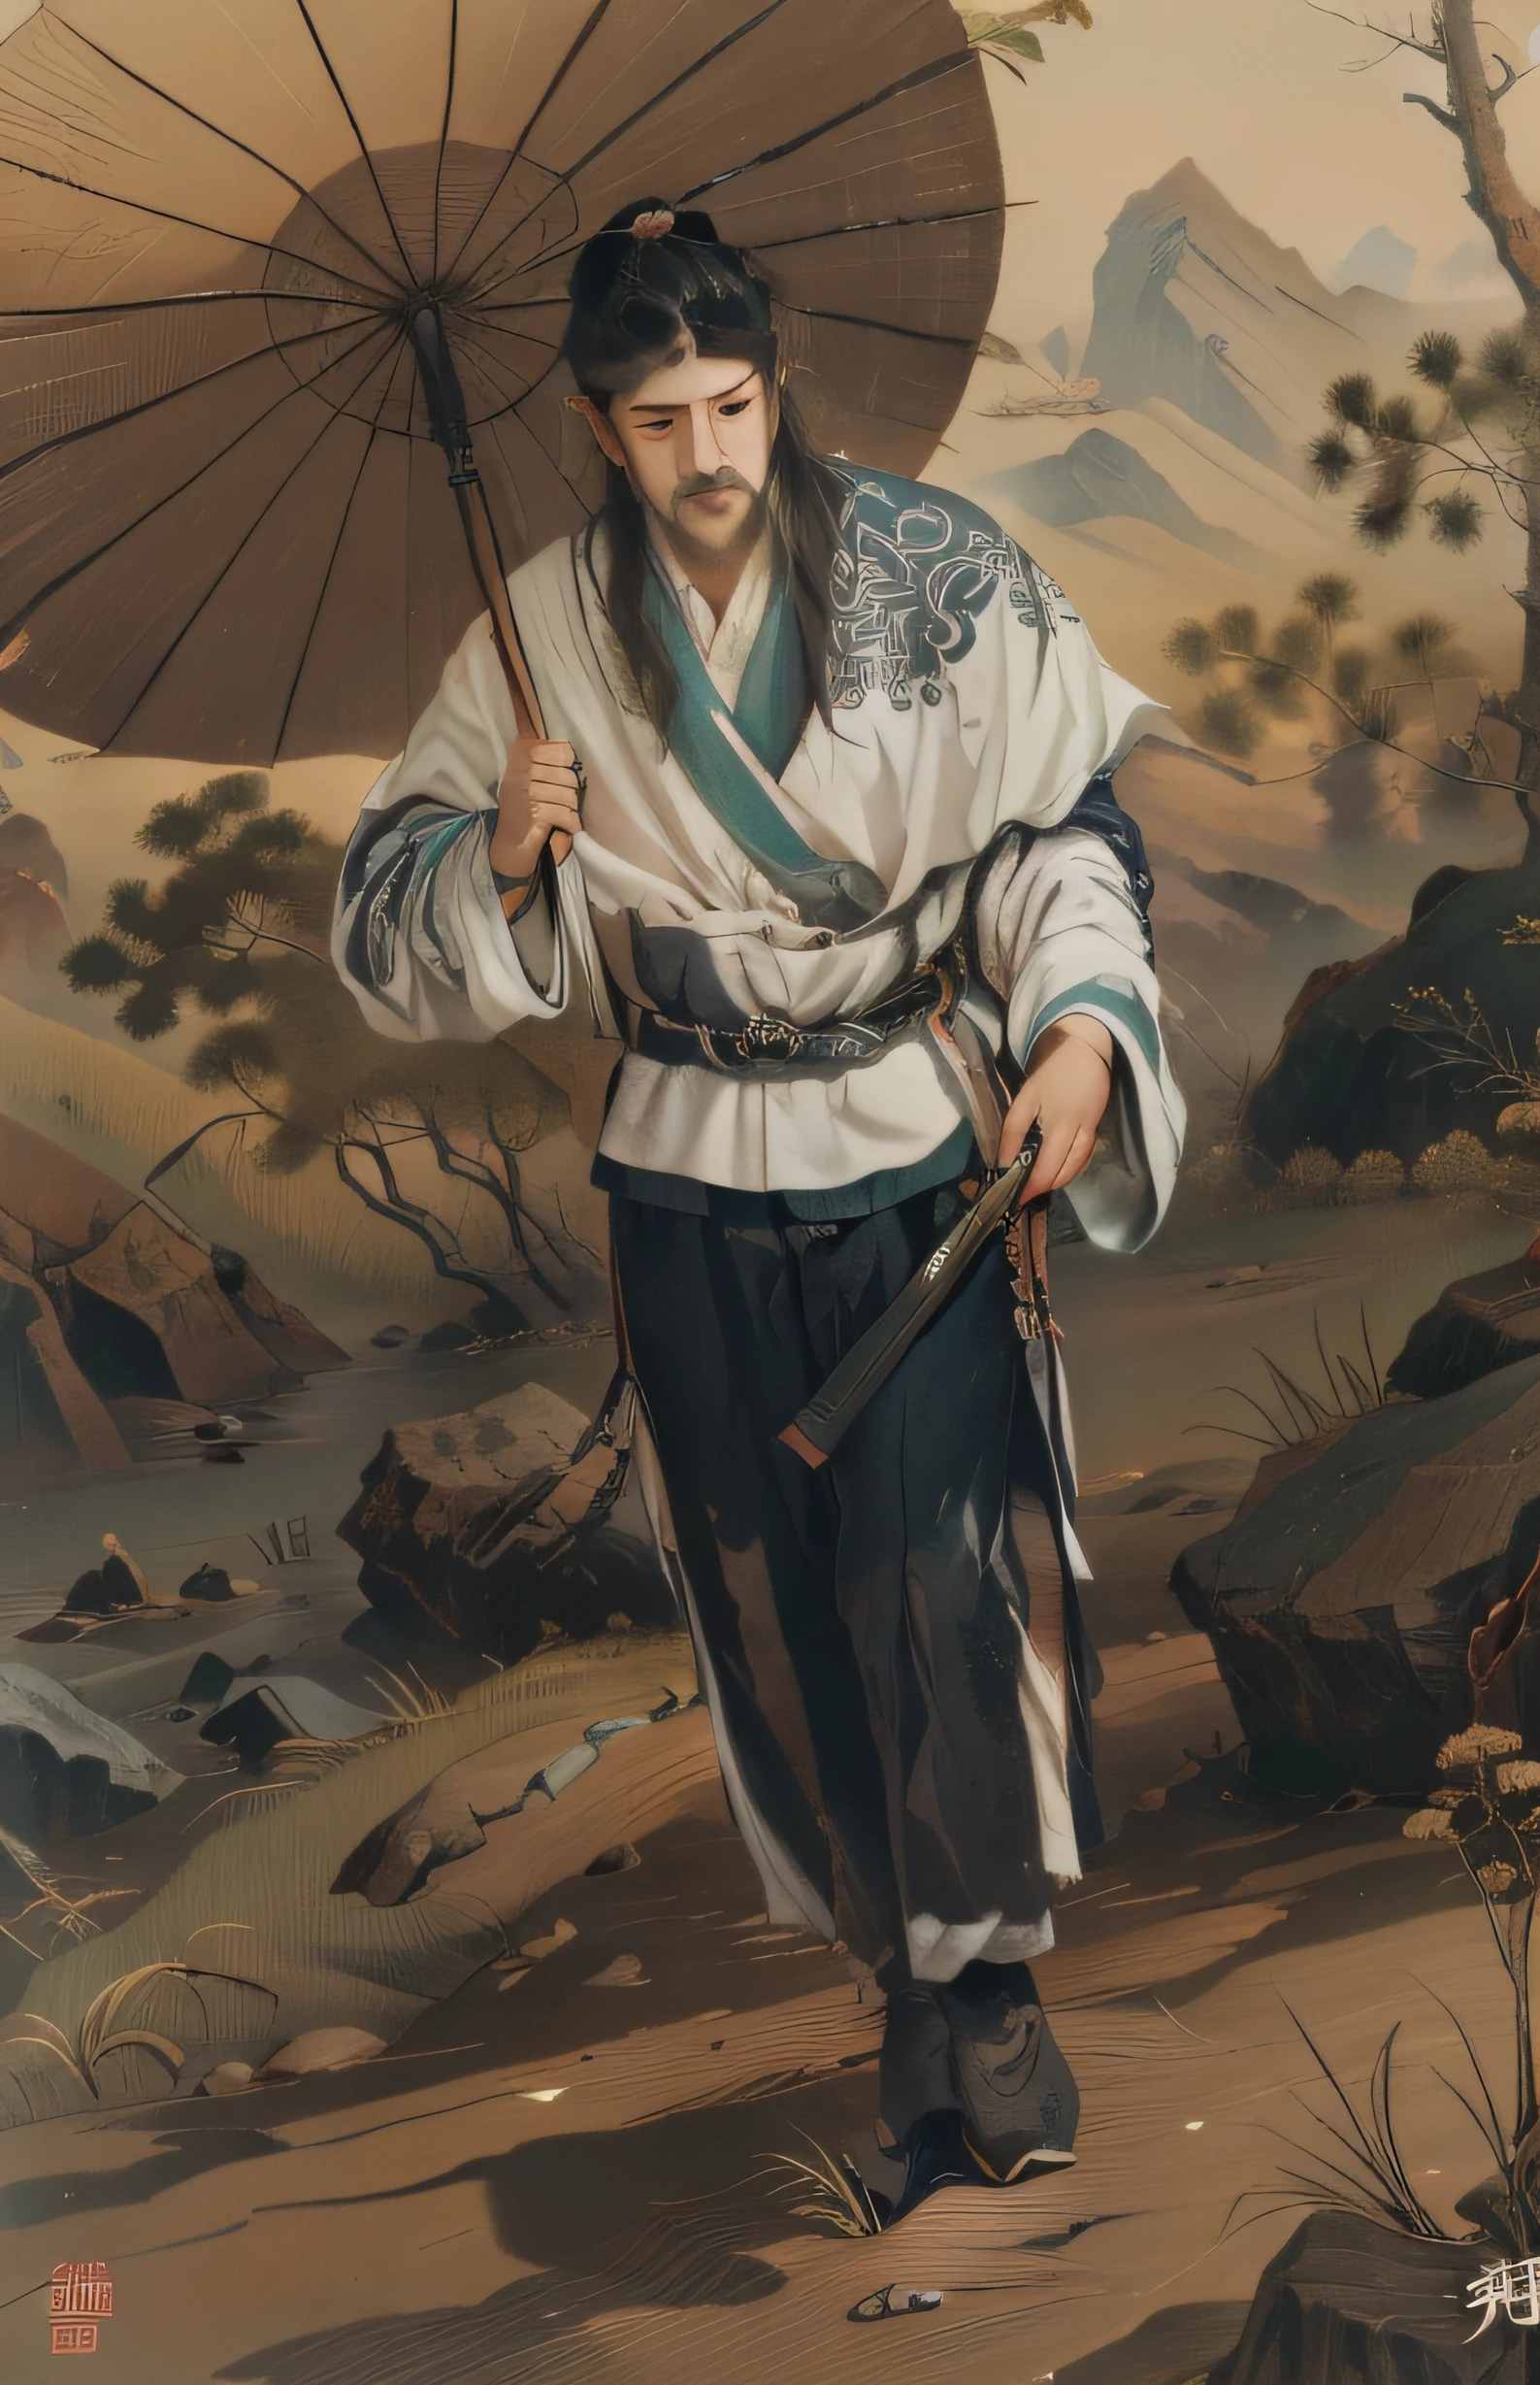 (Unreal Engine 5),Realistic rendering, (Dusk Mountain Forest），Song dynasty poets hurried with umbrellas，Fan in hand，Hanfu， Song Dynasty pastoral, ukiyo-style，epic full color illustration, inspired by Li Kan, tai warlord, Inspired by Chen Danqing, The feeling comes from Shen Quan, Inspired by Hu Zaobin, inspired by Zhu Derun, Inspired by Huang Shen, inspired by Li Rongjin, Inspired by Shen Zhou，inspired by Lu Zhi, author：Yoon Du-seop,